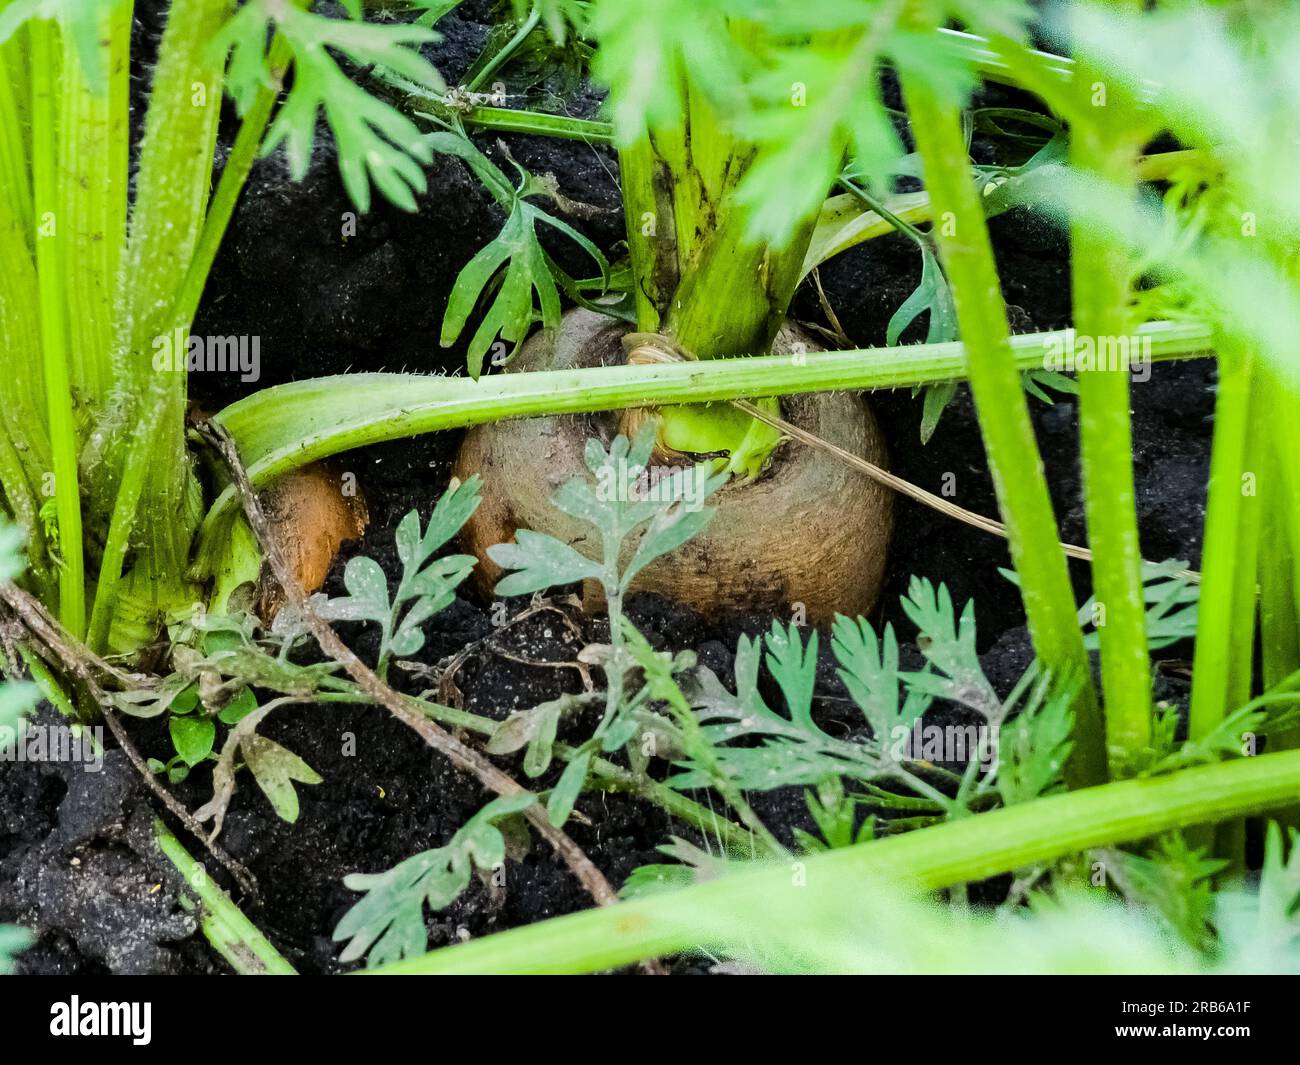 Fresh carrots growing in carrot field. Vegetable grows in the garden in the soil. Carrots on garden soil. Harvest. Agriculture. Stock Photo